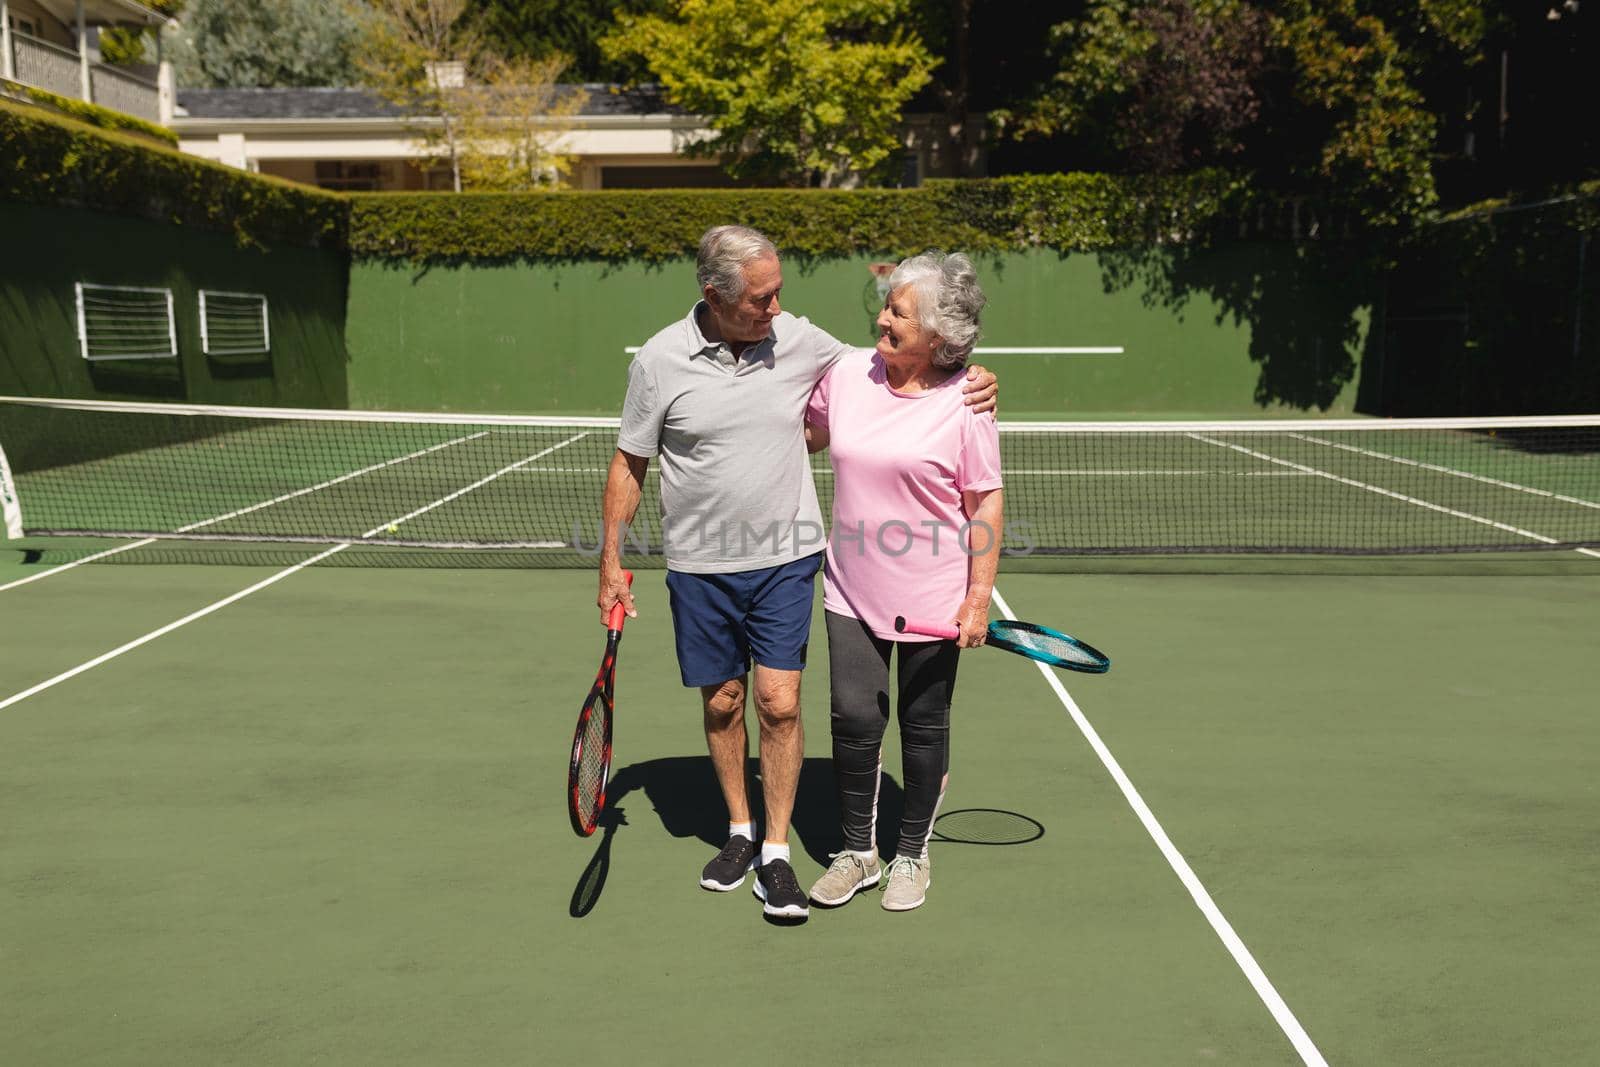 Senior caucasian couple embracing and smiling on tennis court by Wavebreakmedia